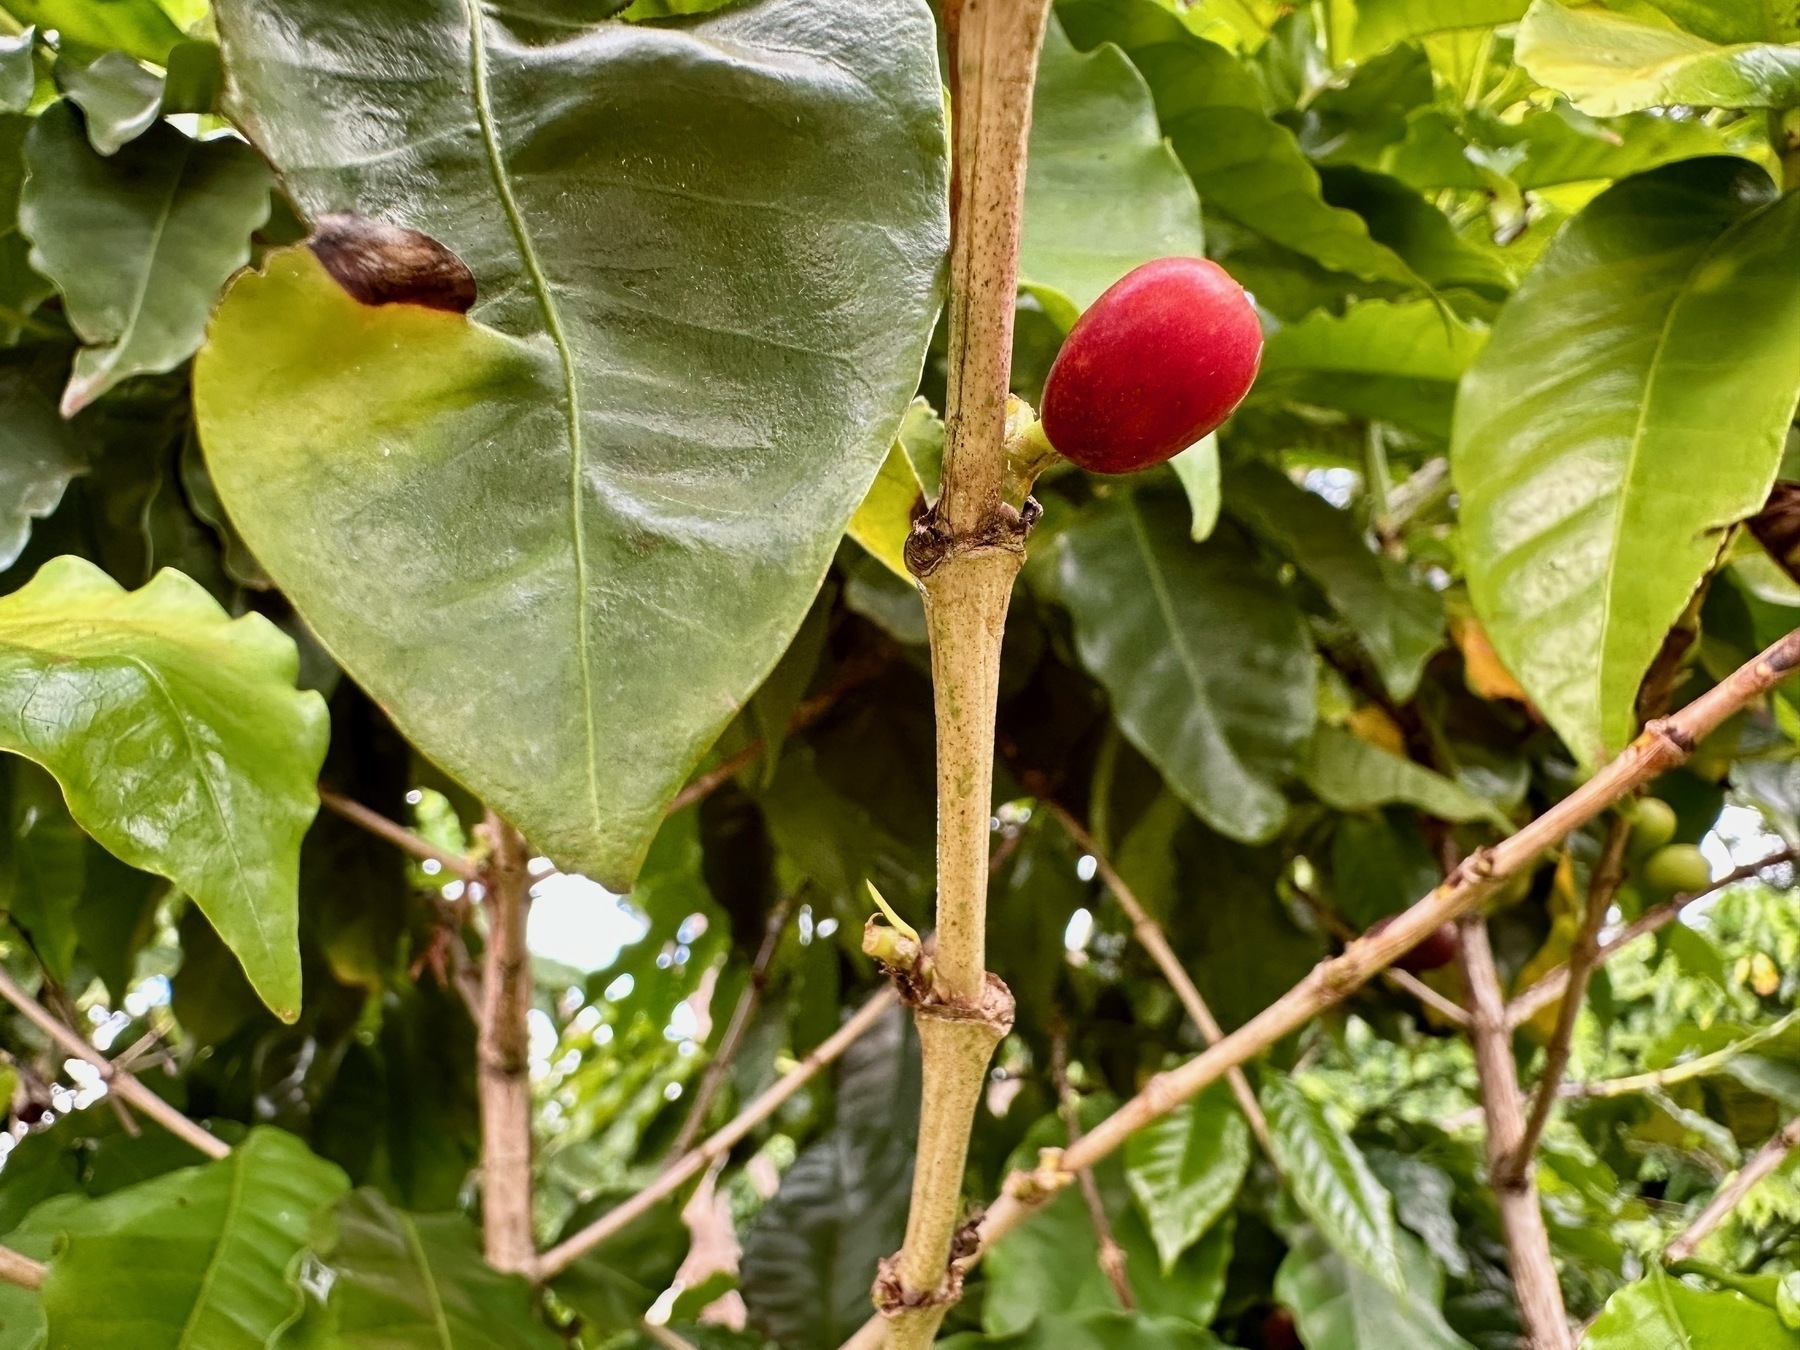 A single bright red coffee cherry surrounded by plasticy grean leaves. One of the leaves has an irregular border and a brown stain.